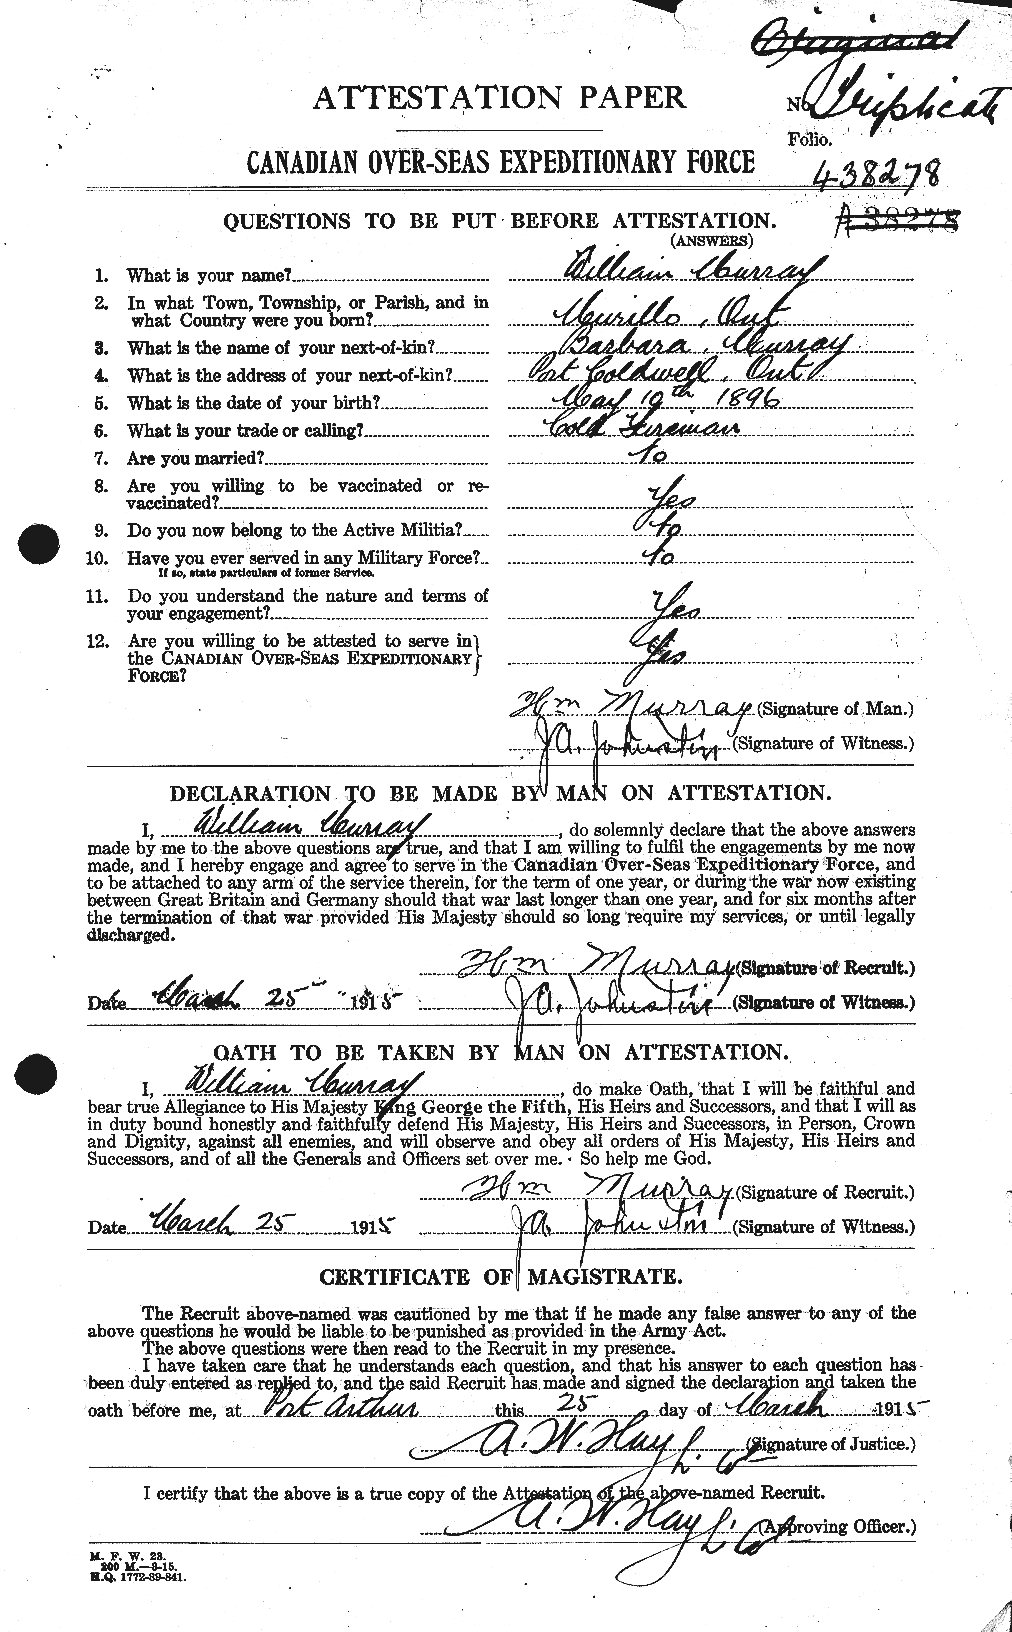 Personnel Records of the First World War - CEF 514222a